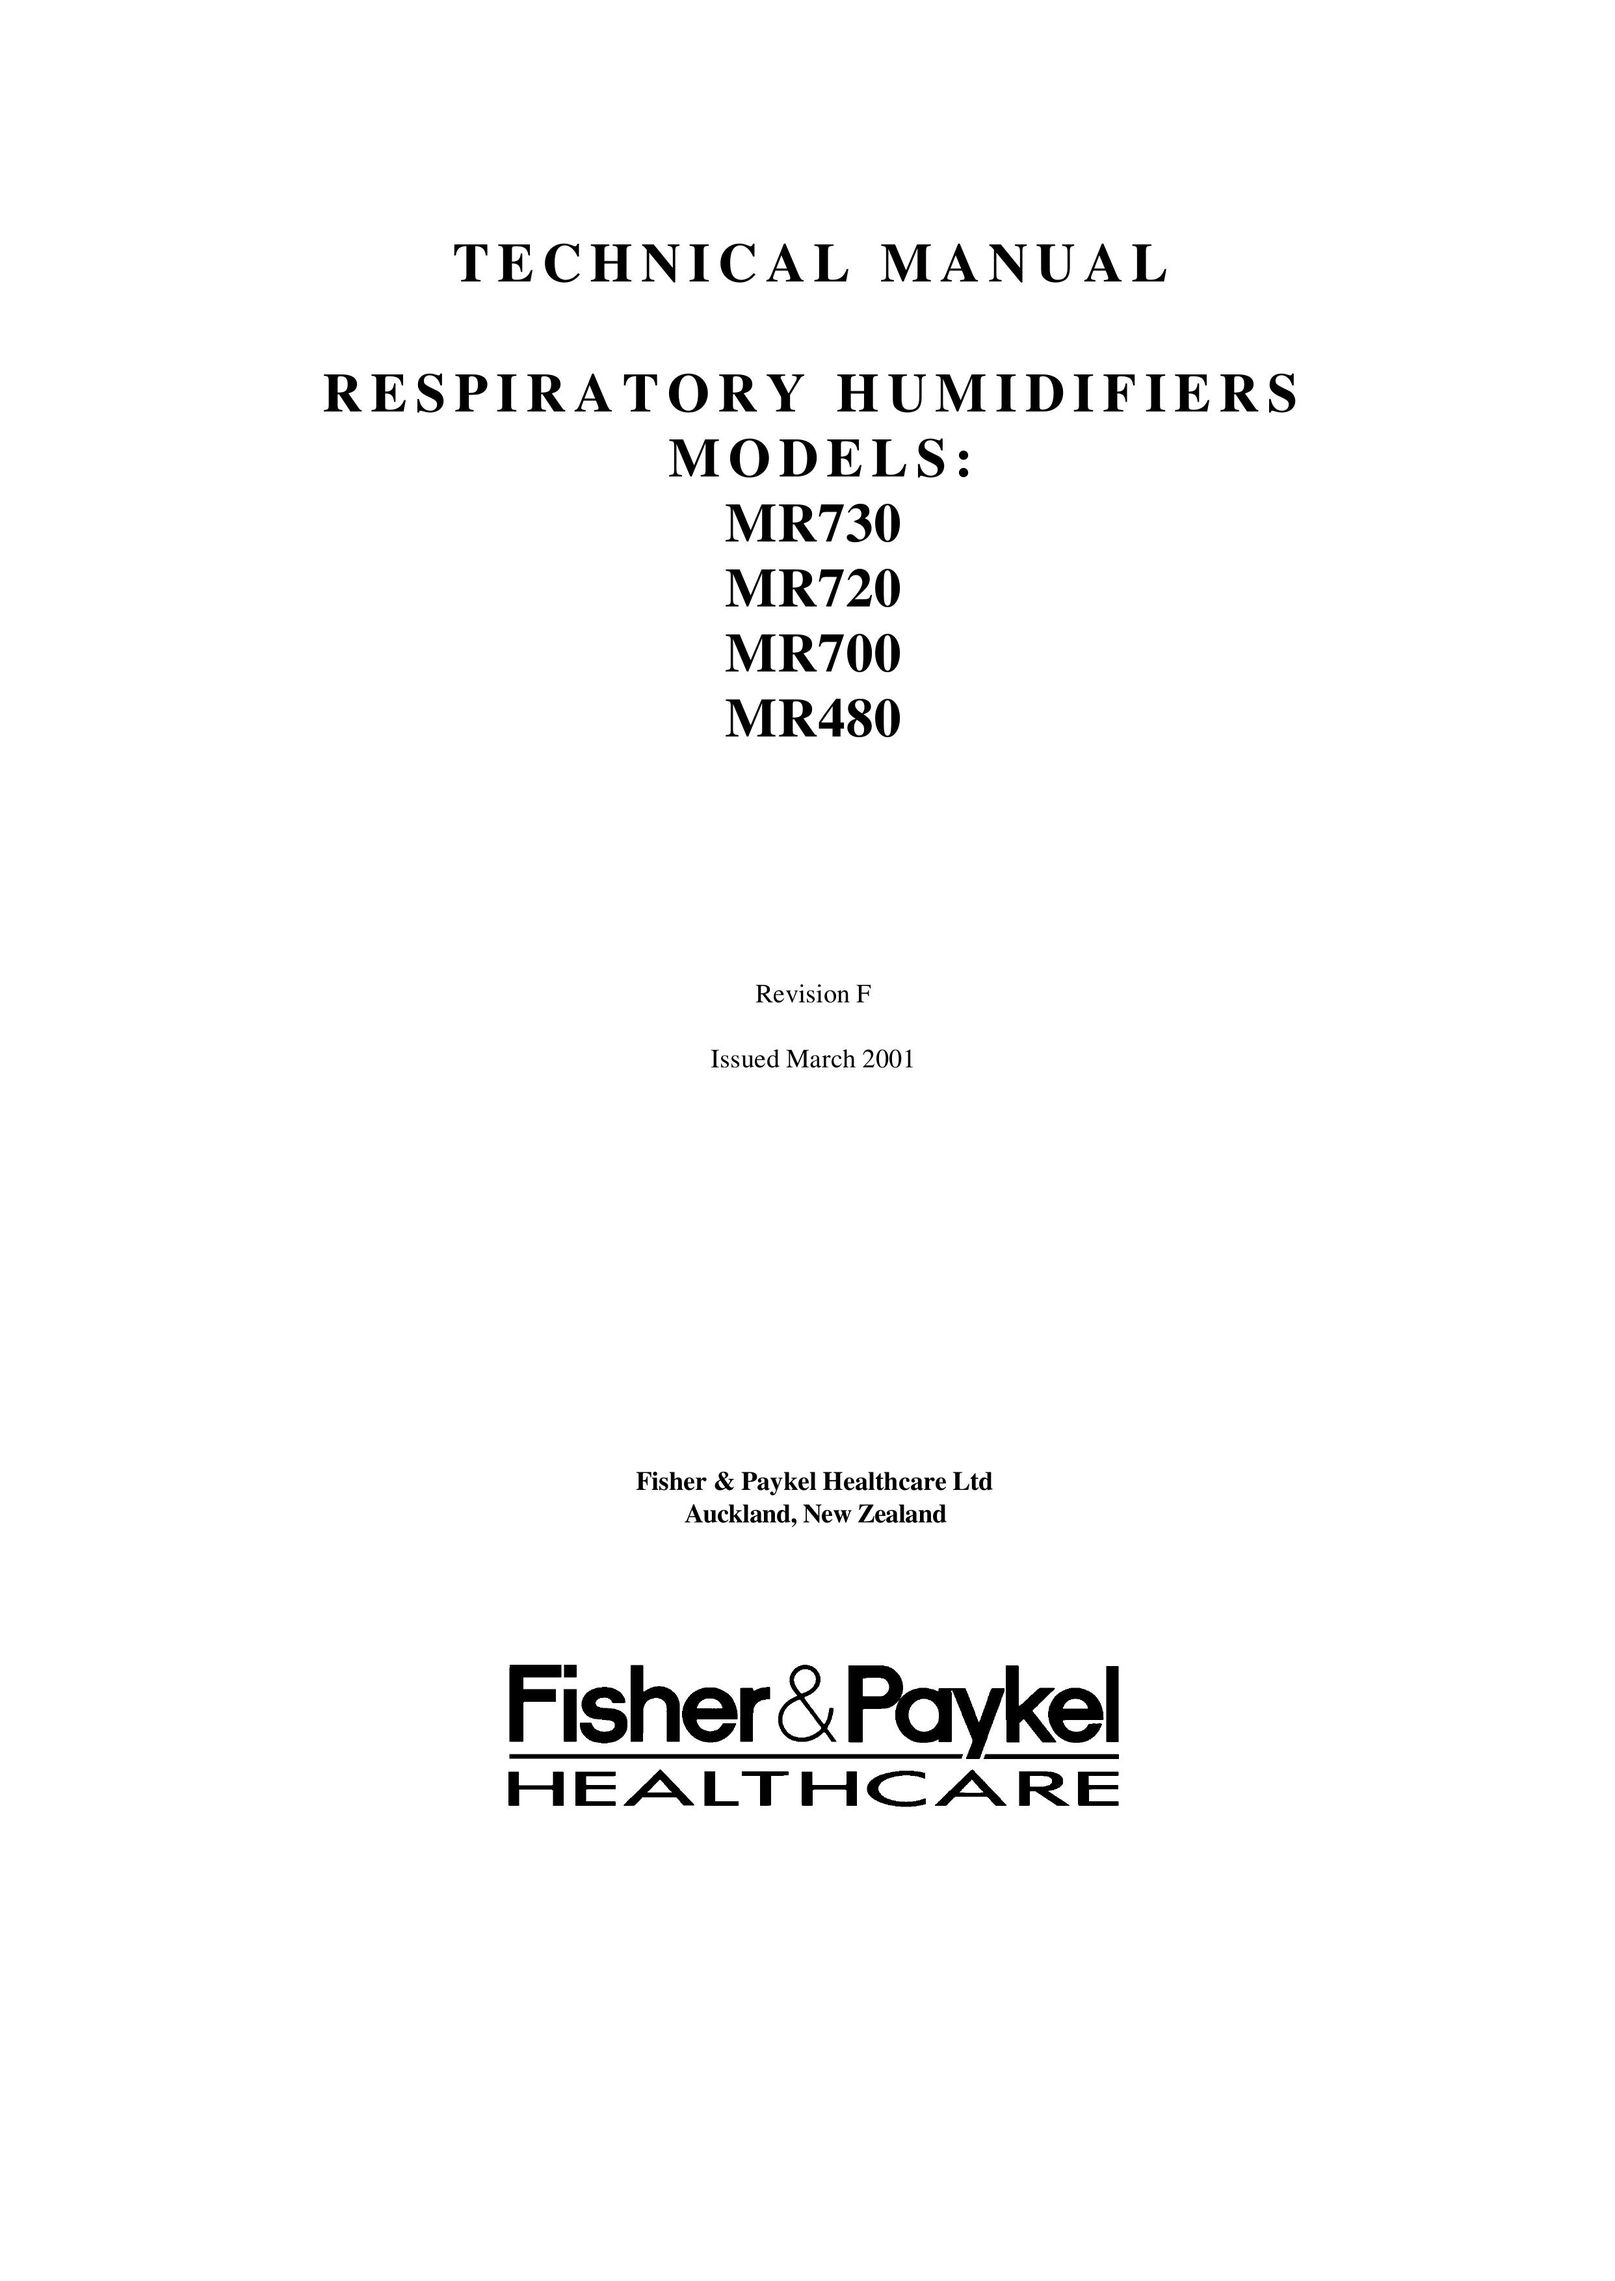 Fisher & Paykel MR730 Humidifier User Manual